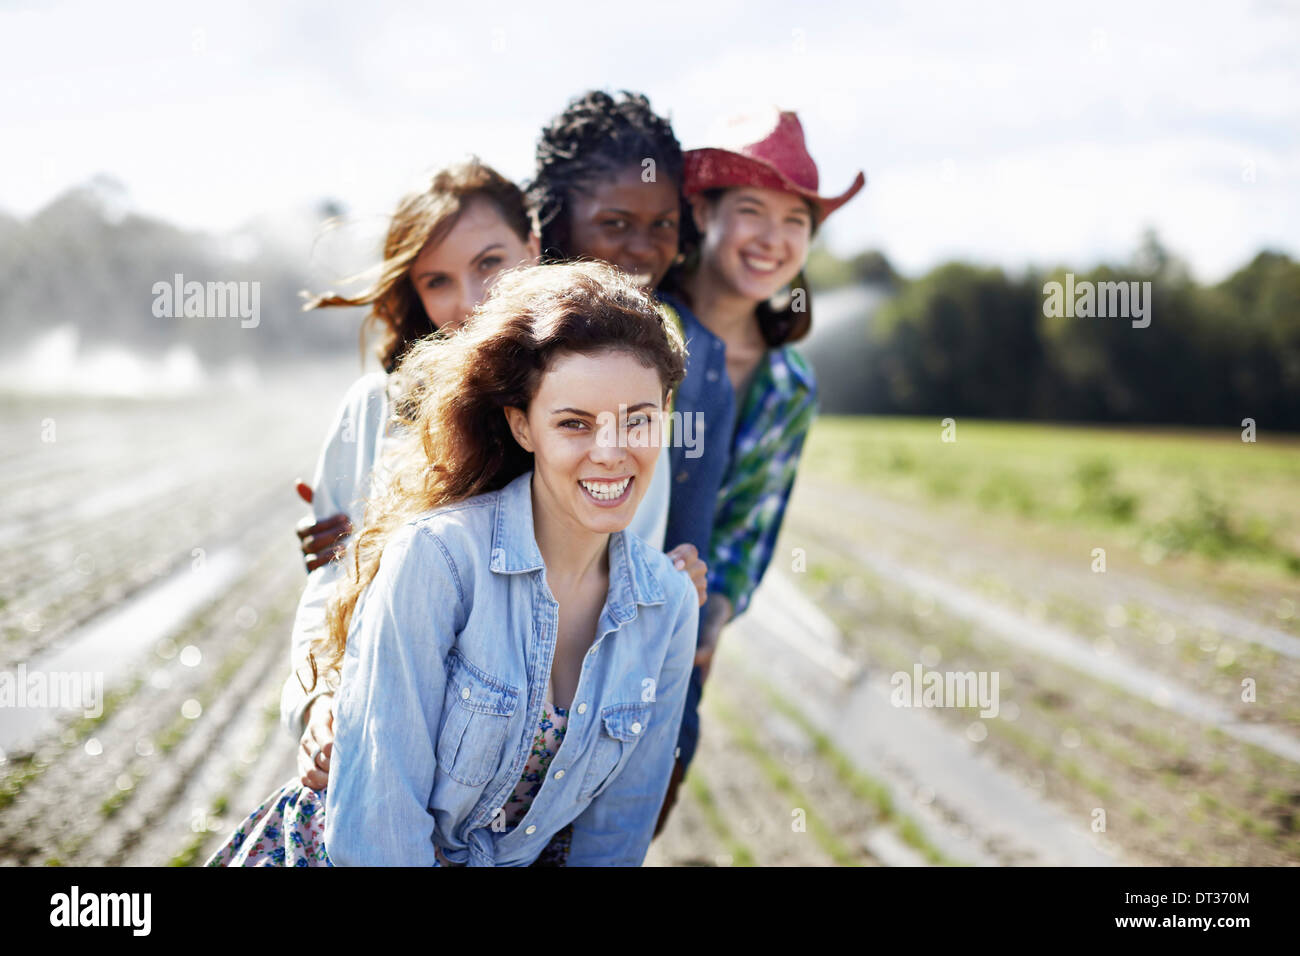 Four young women in a field full of seedlings an organic crop with sprinklers spraying water in the background Stock Photo